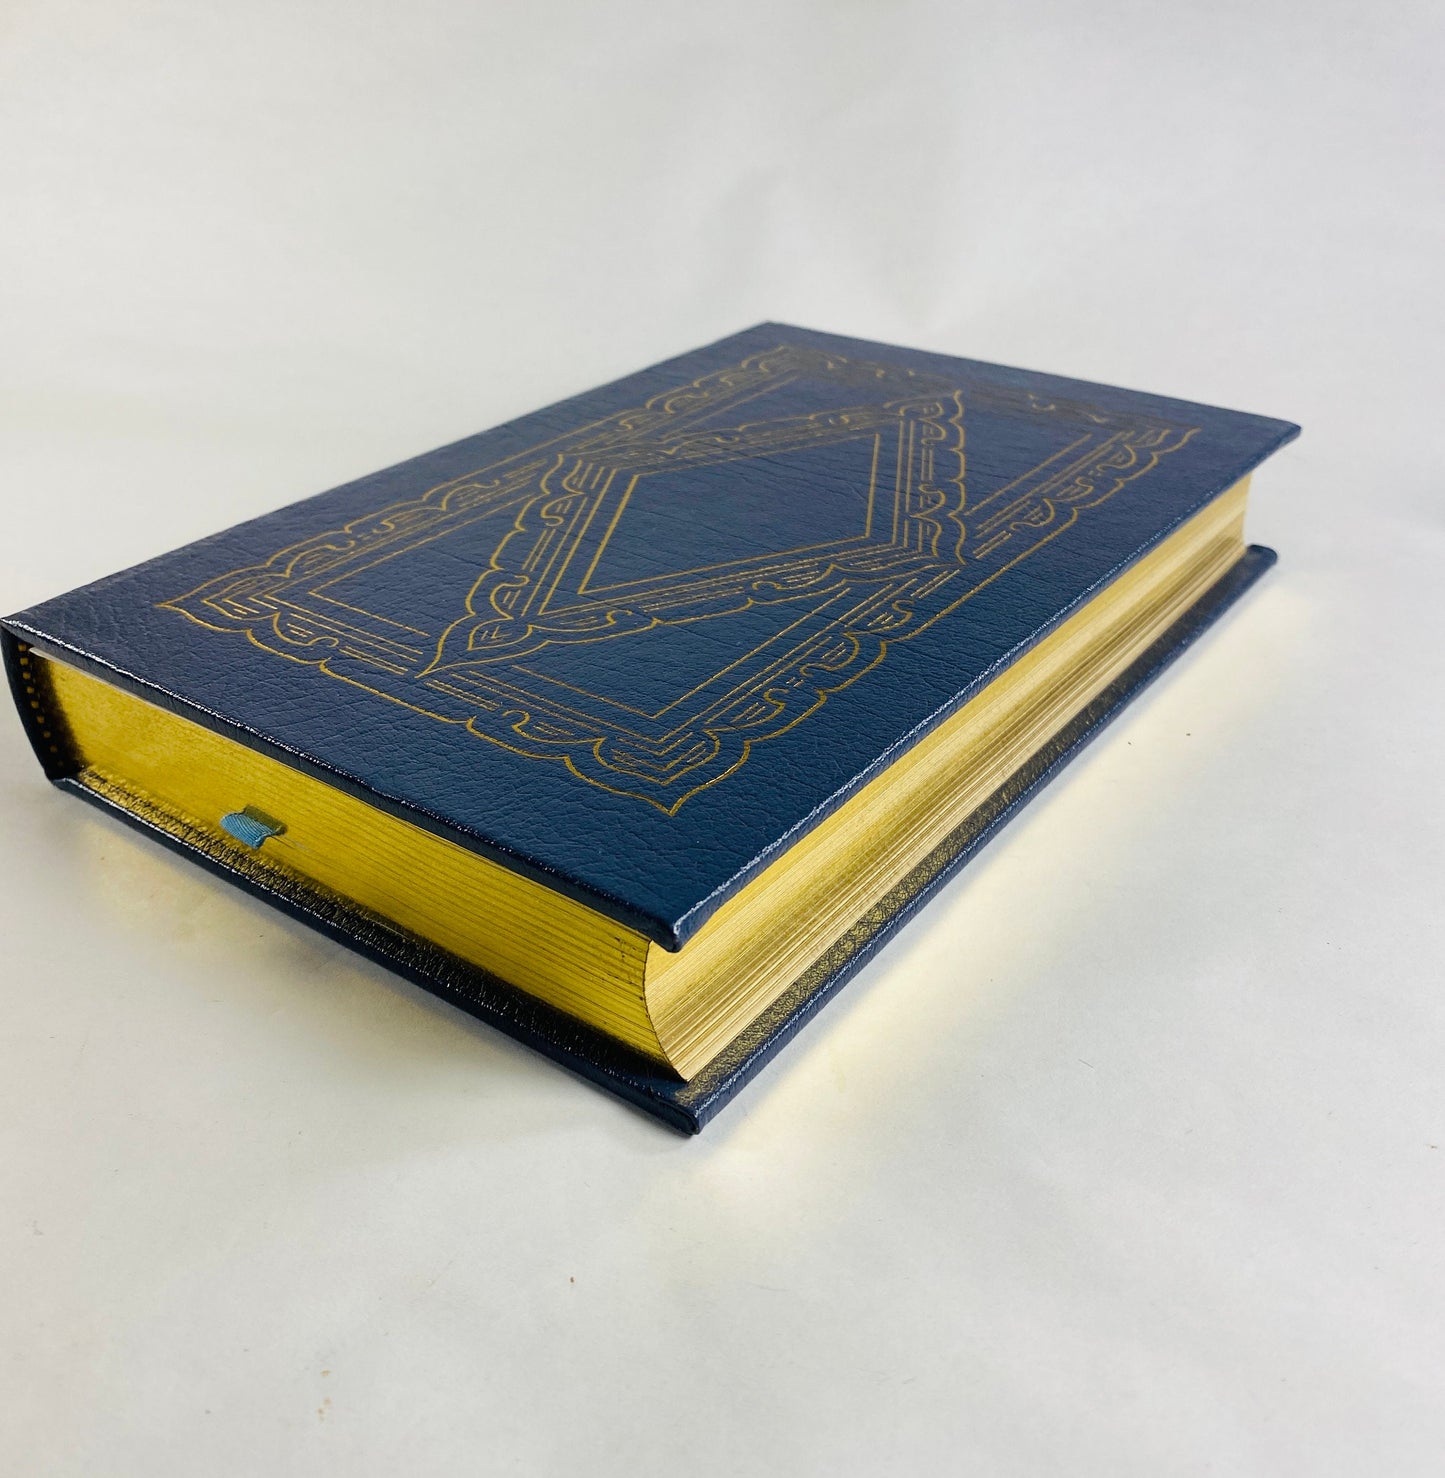 James Polk Continentalist Biography of American President vintage Easton Press book circa 1987 Volume 2 Blue leather with gold gilt